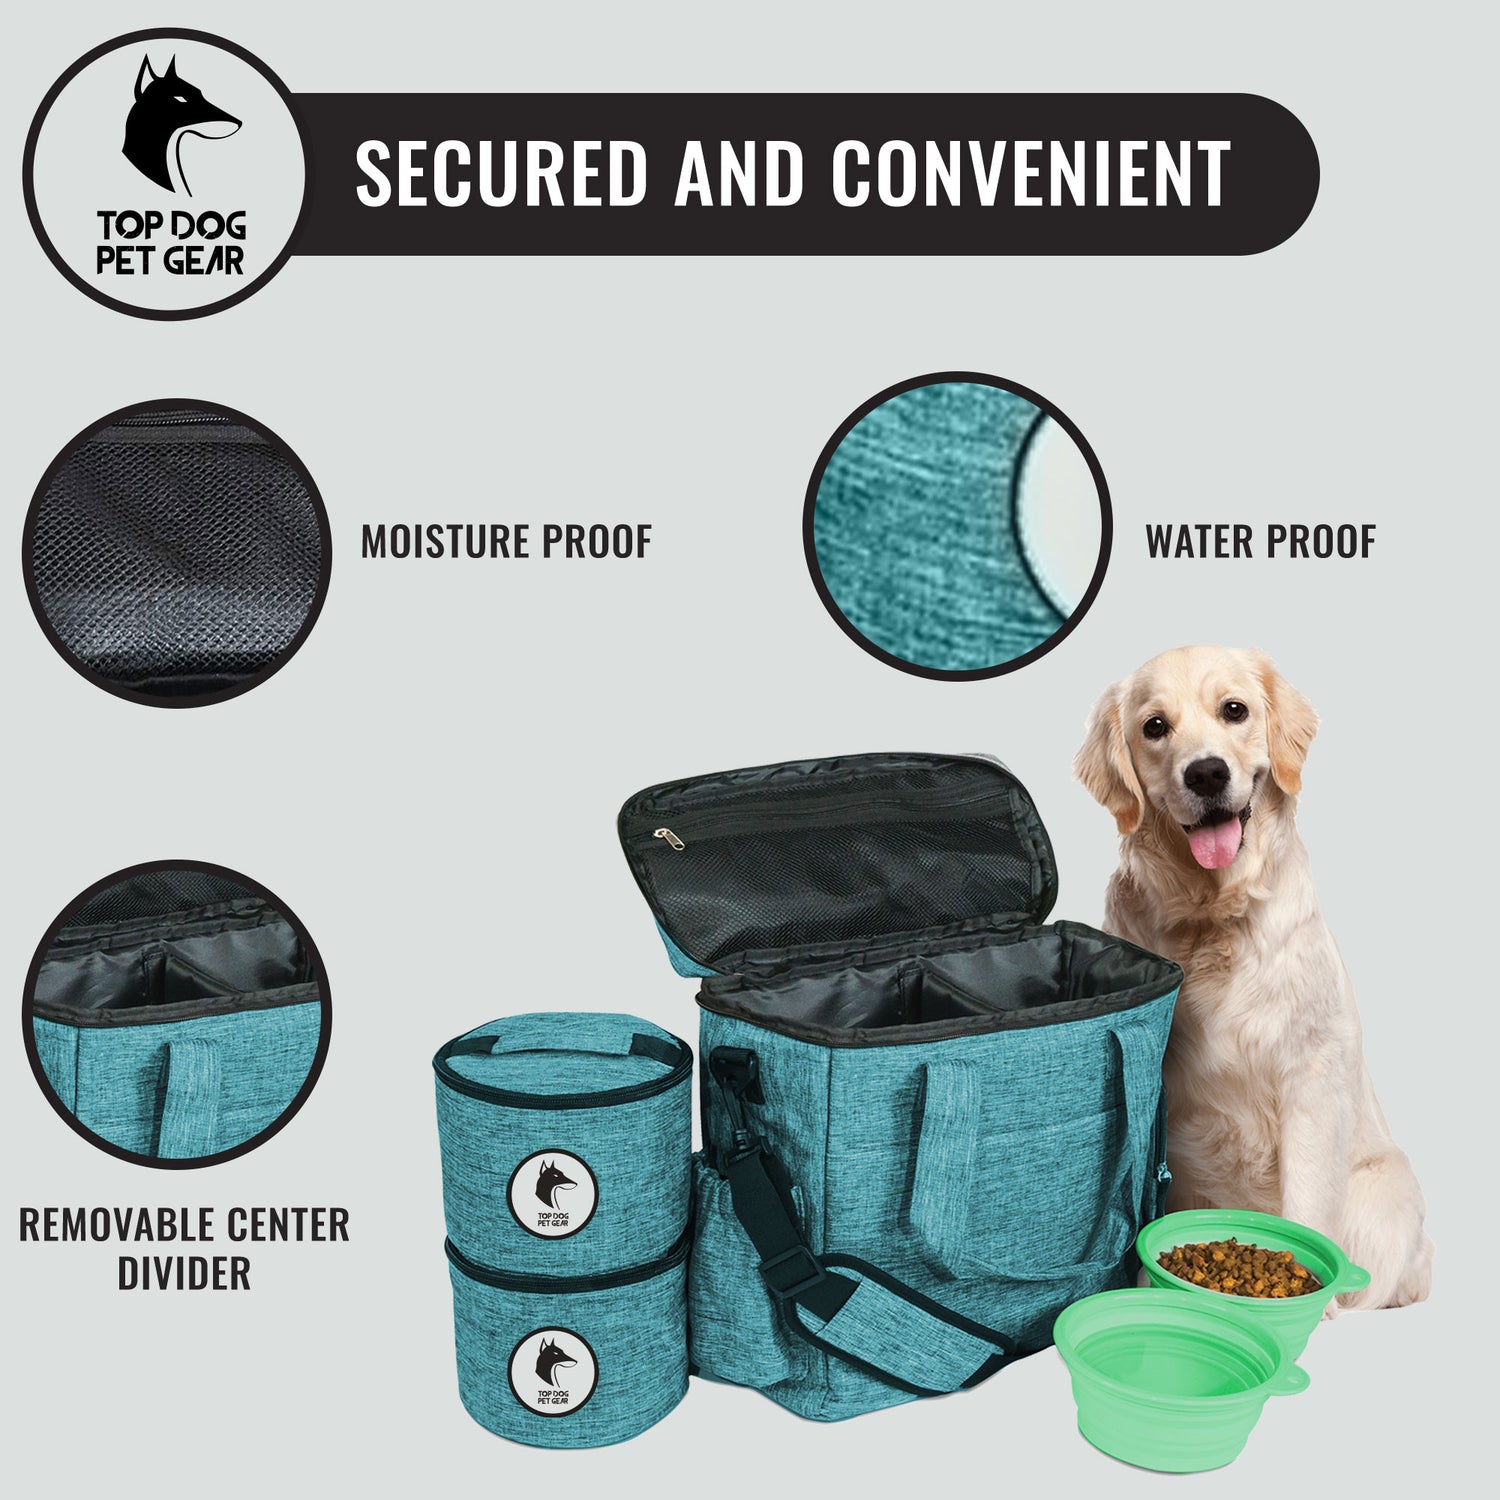 BAGLHER 丨Dog Travel Bag Backpack,Airline Approved Pet Supplies Backpack,Dog Travel Backpack with 2 Silicone Collapsible Bowls and 2 Food Baskets Sky